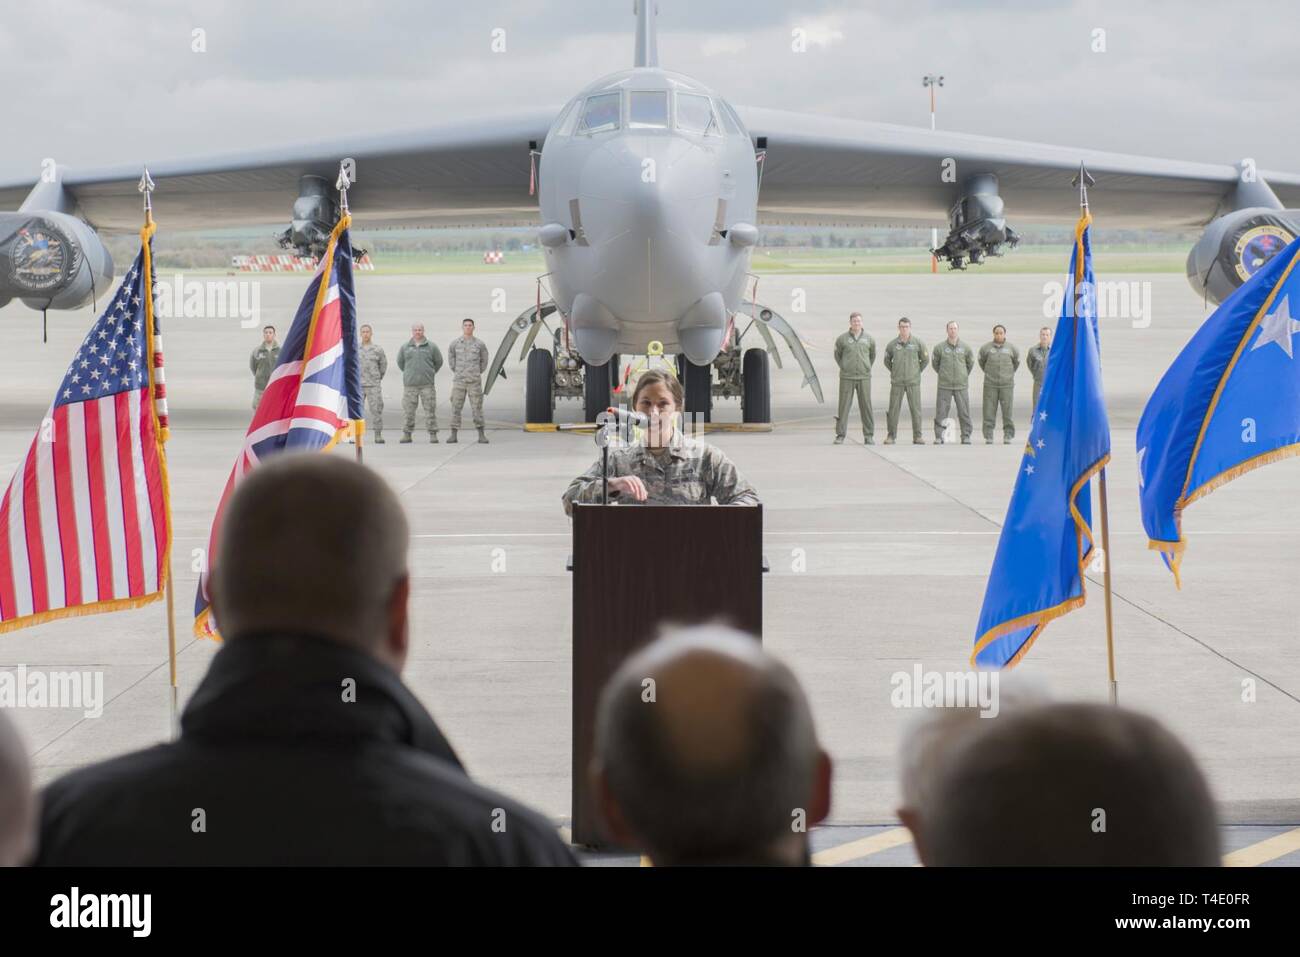 U.S. Air Force 1st Lt. Sarah Johnson, 501st Combat Support Wing public affairs officer, speaks during a press conference at RAF Fairford, March 19, 2019, regarding the Bomber Task Force Europe deployment. The contingent of B-52 aircraft, Airmen and support equipment are currently deployed from the 2nd Bomb Wing, Barksdale Air Force Base, La., to support the BTF. The deployment of strategic bombers to the U.K. helps exercise RAF Fairford as U.S. Air Forces in Europe - Air Forces Africa’s forward-operating location for bombers. The deployment includes joint and allied training to enhance interop Stock Photo